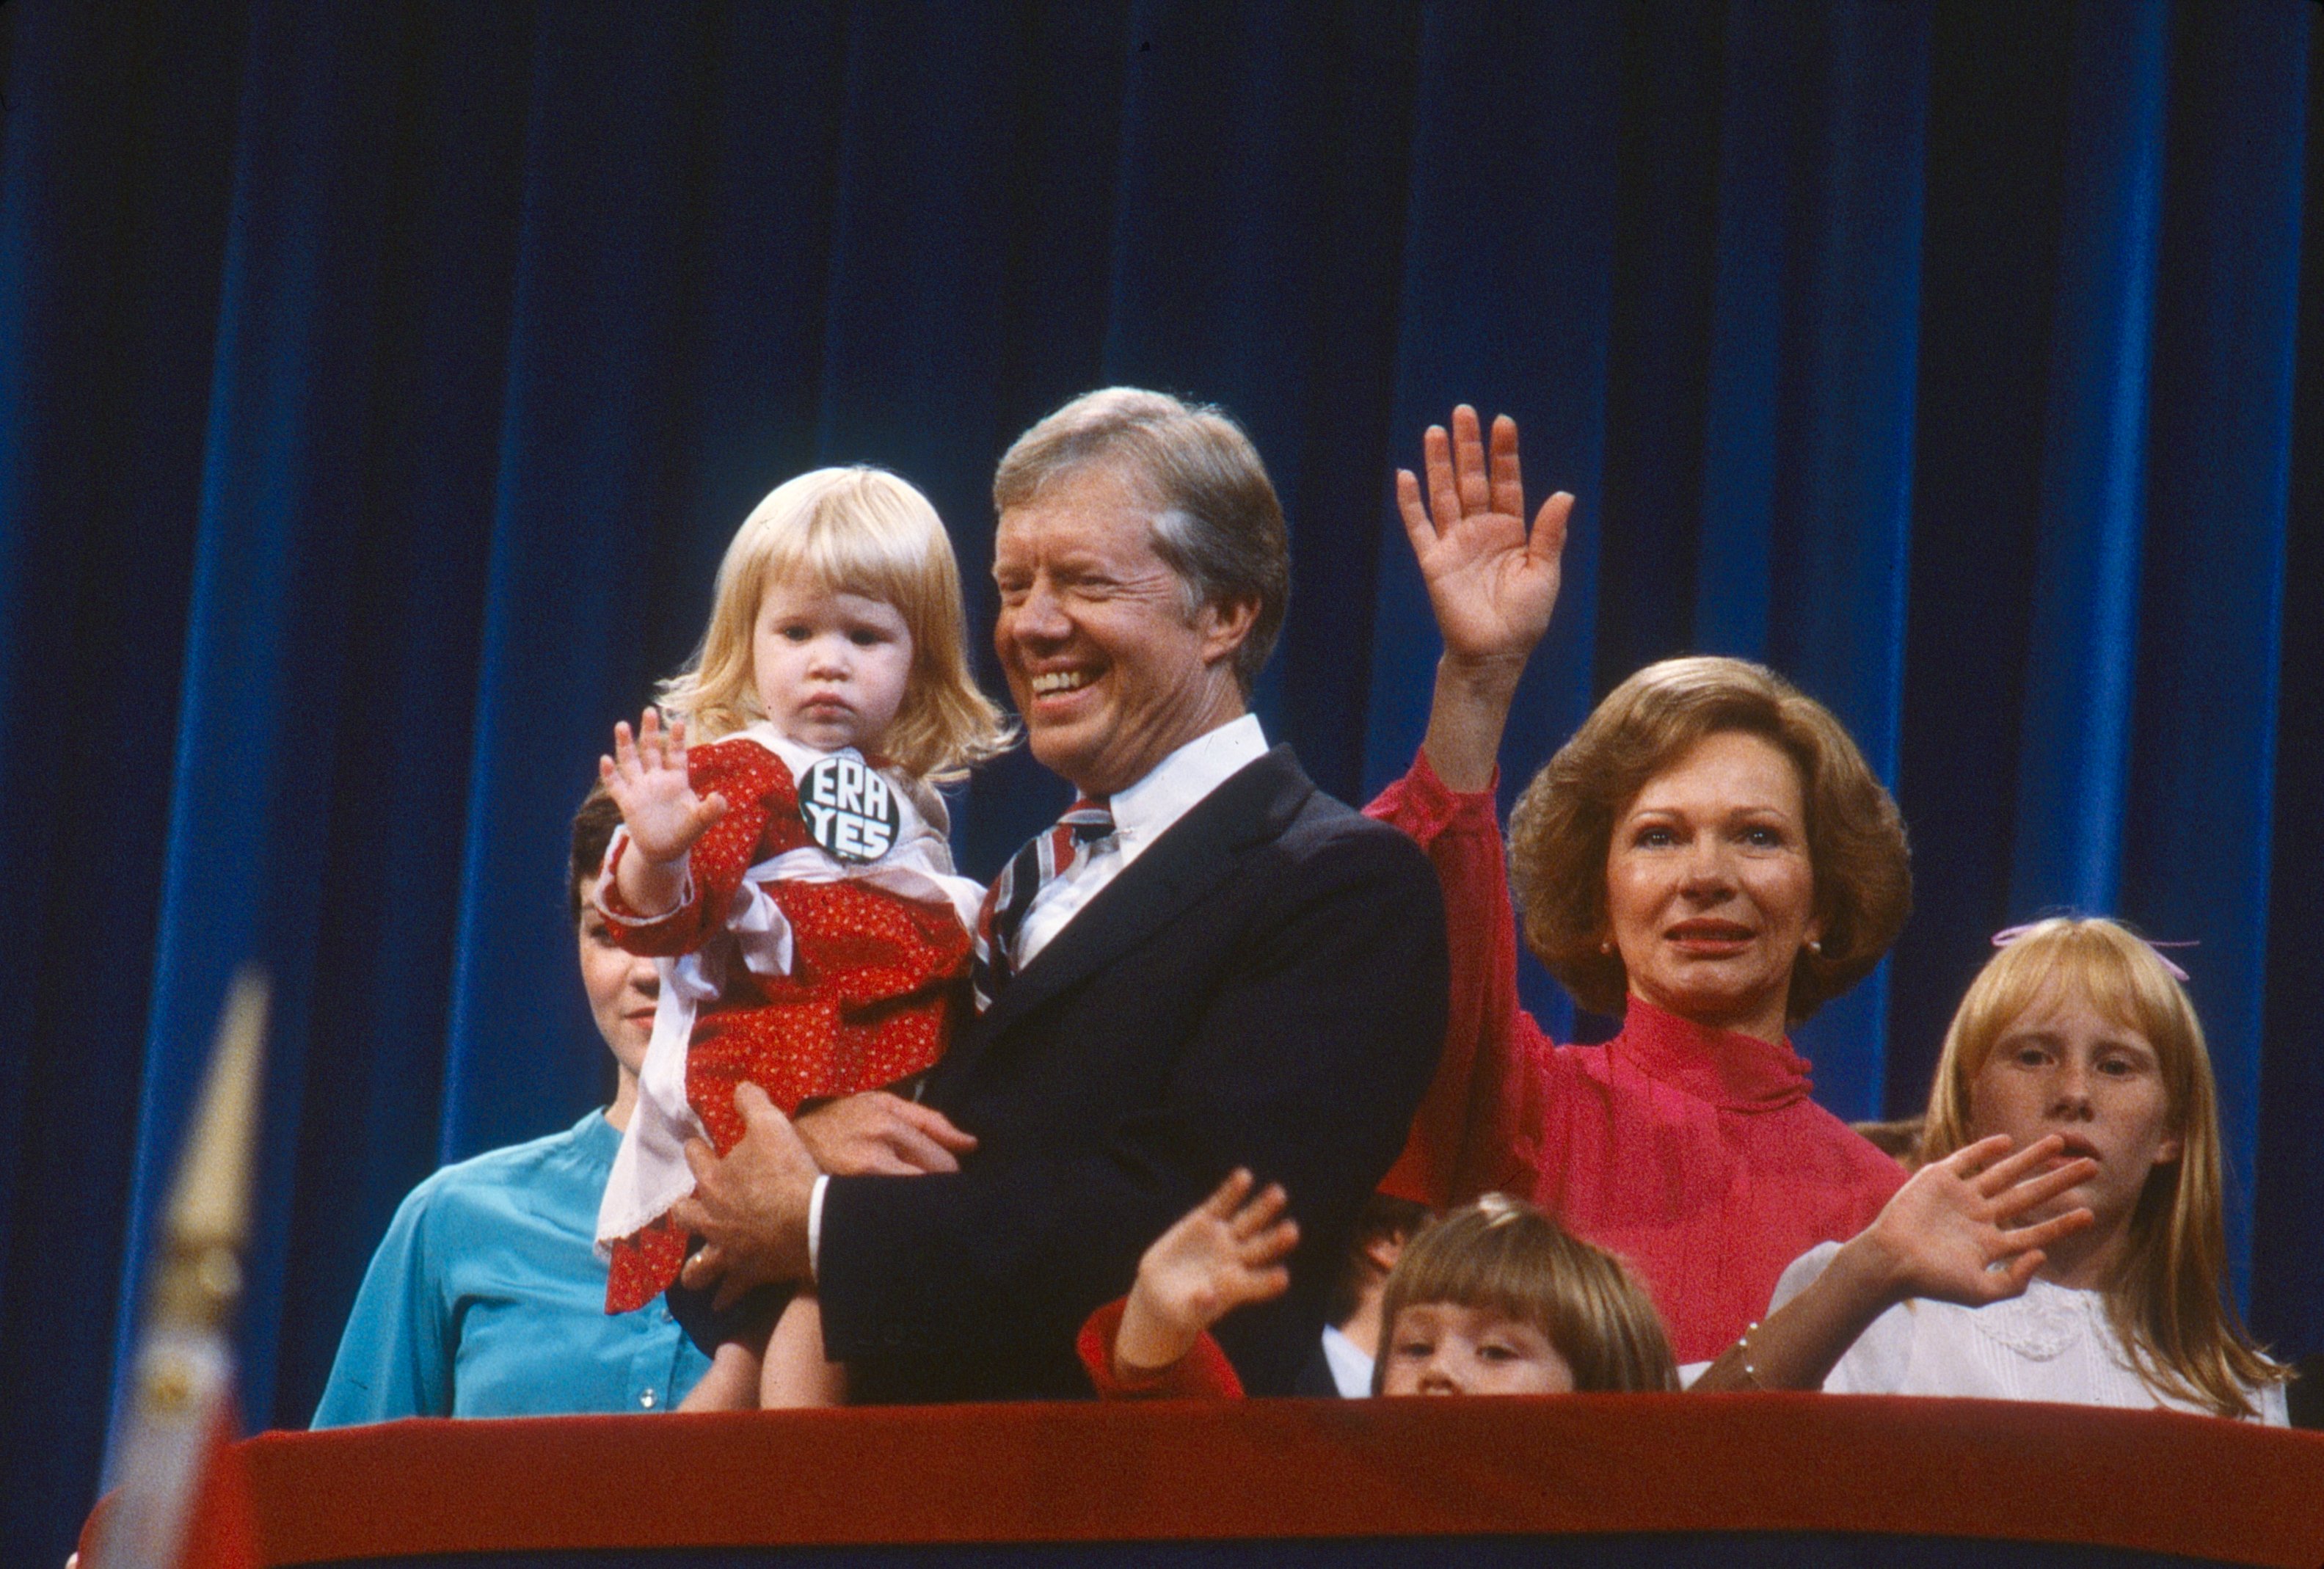 President Jimmy Carter, holding his grand-daughter Sarah Carter, First Lady Rosalynn Carter (in red), and their daughter, Amy Carter during the 1980 National Democratic Convention held at Madison Square Garden, New York, New York, August 11-14, 1980.| Source: Getty Images